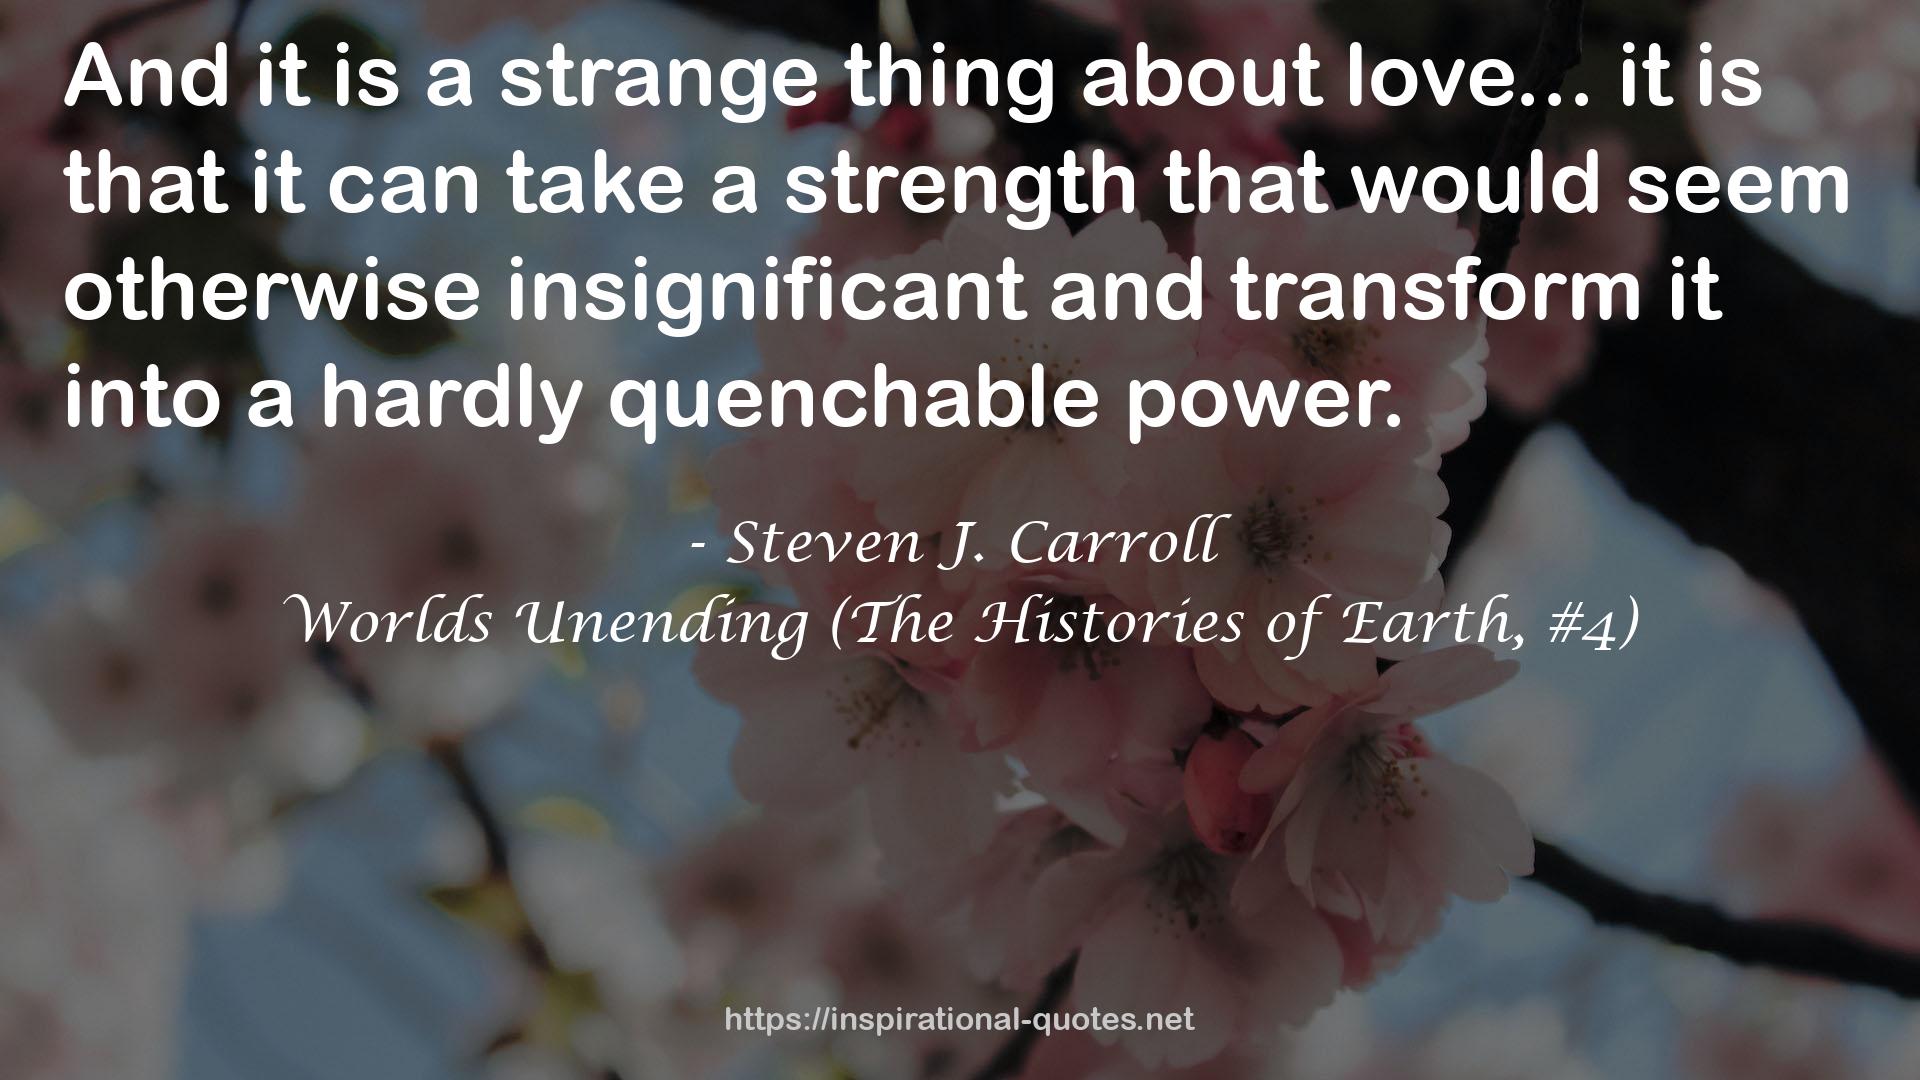 Worlds Unending (The Histories of Earth, #4) QUOTES